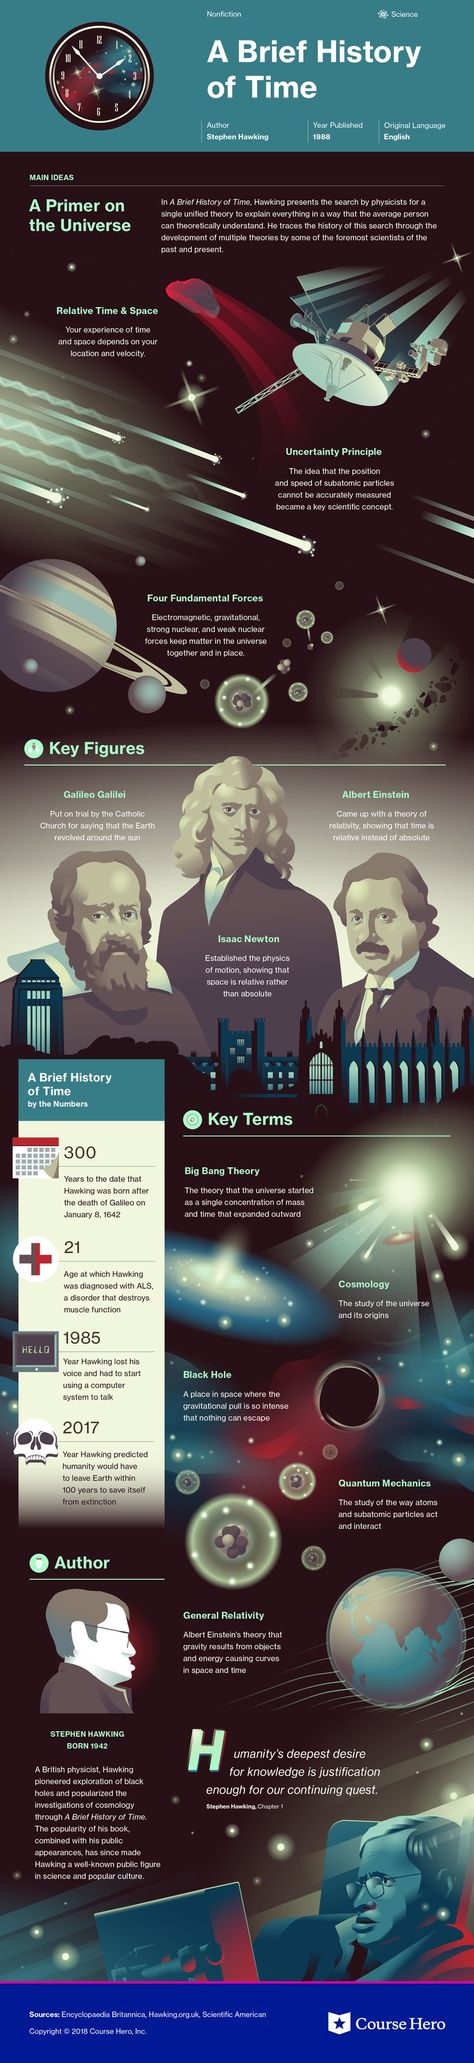 A Brief History Of Time Book, History Of Universe, A Brief History Of Time, Brief History Of Time, Physics Facts, Book Infographic, History Of Astronomy, History Of Time, Astronomy Facts